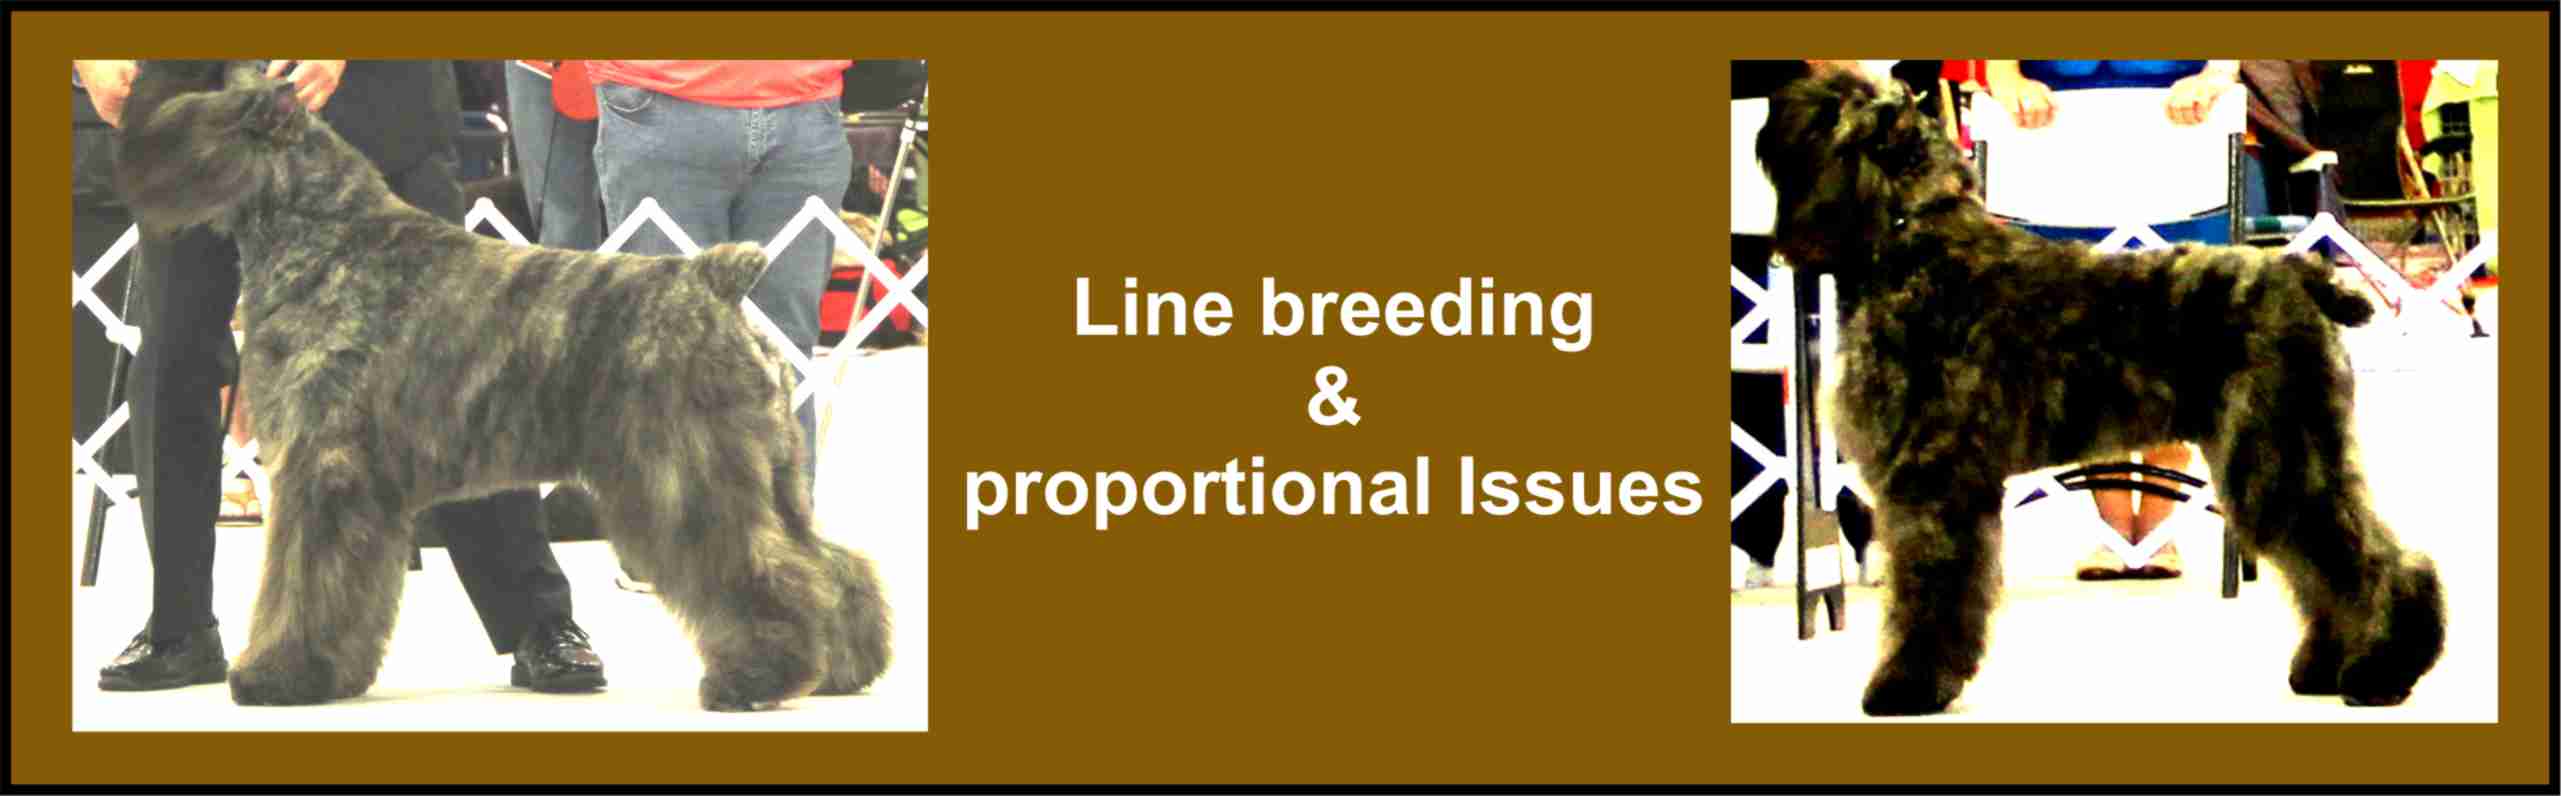 LINE BREEDING AND PROPORTIONAL ISSUES